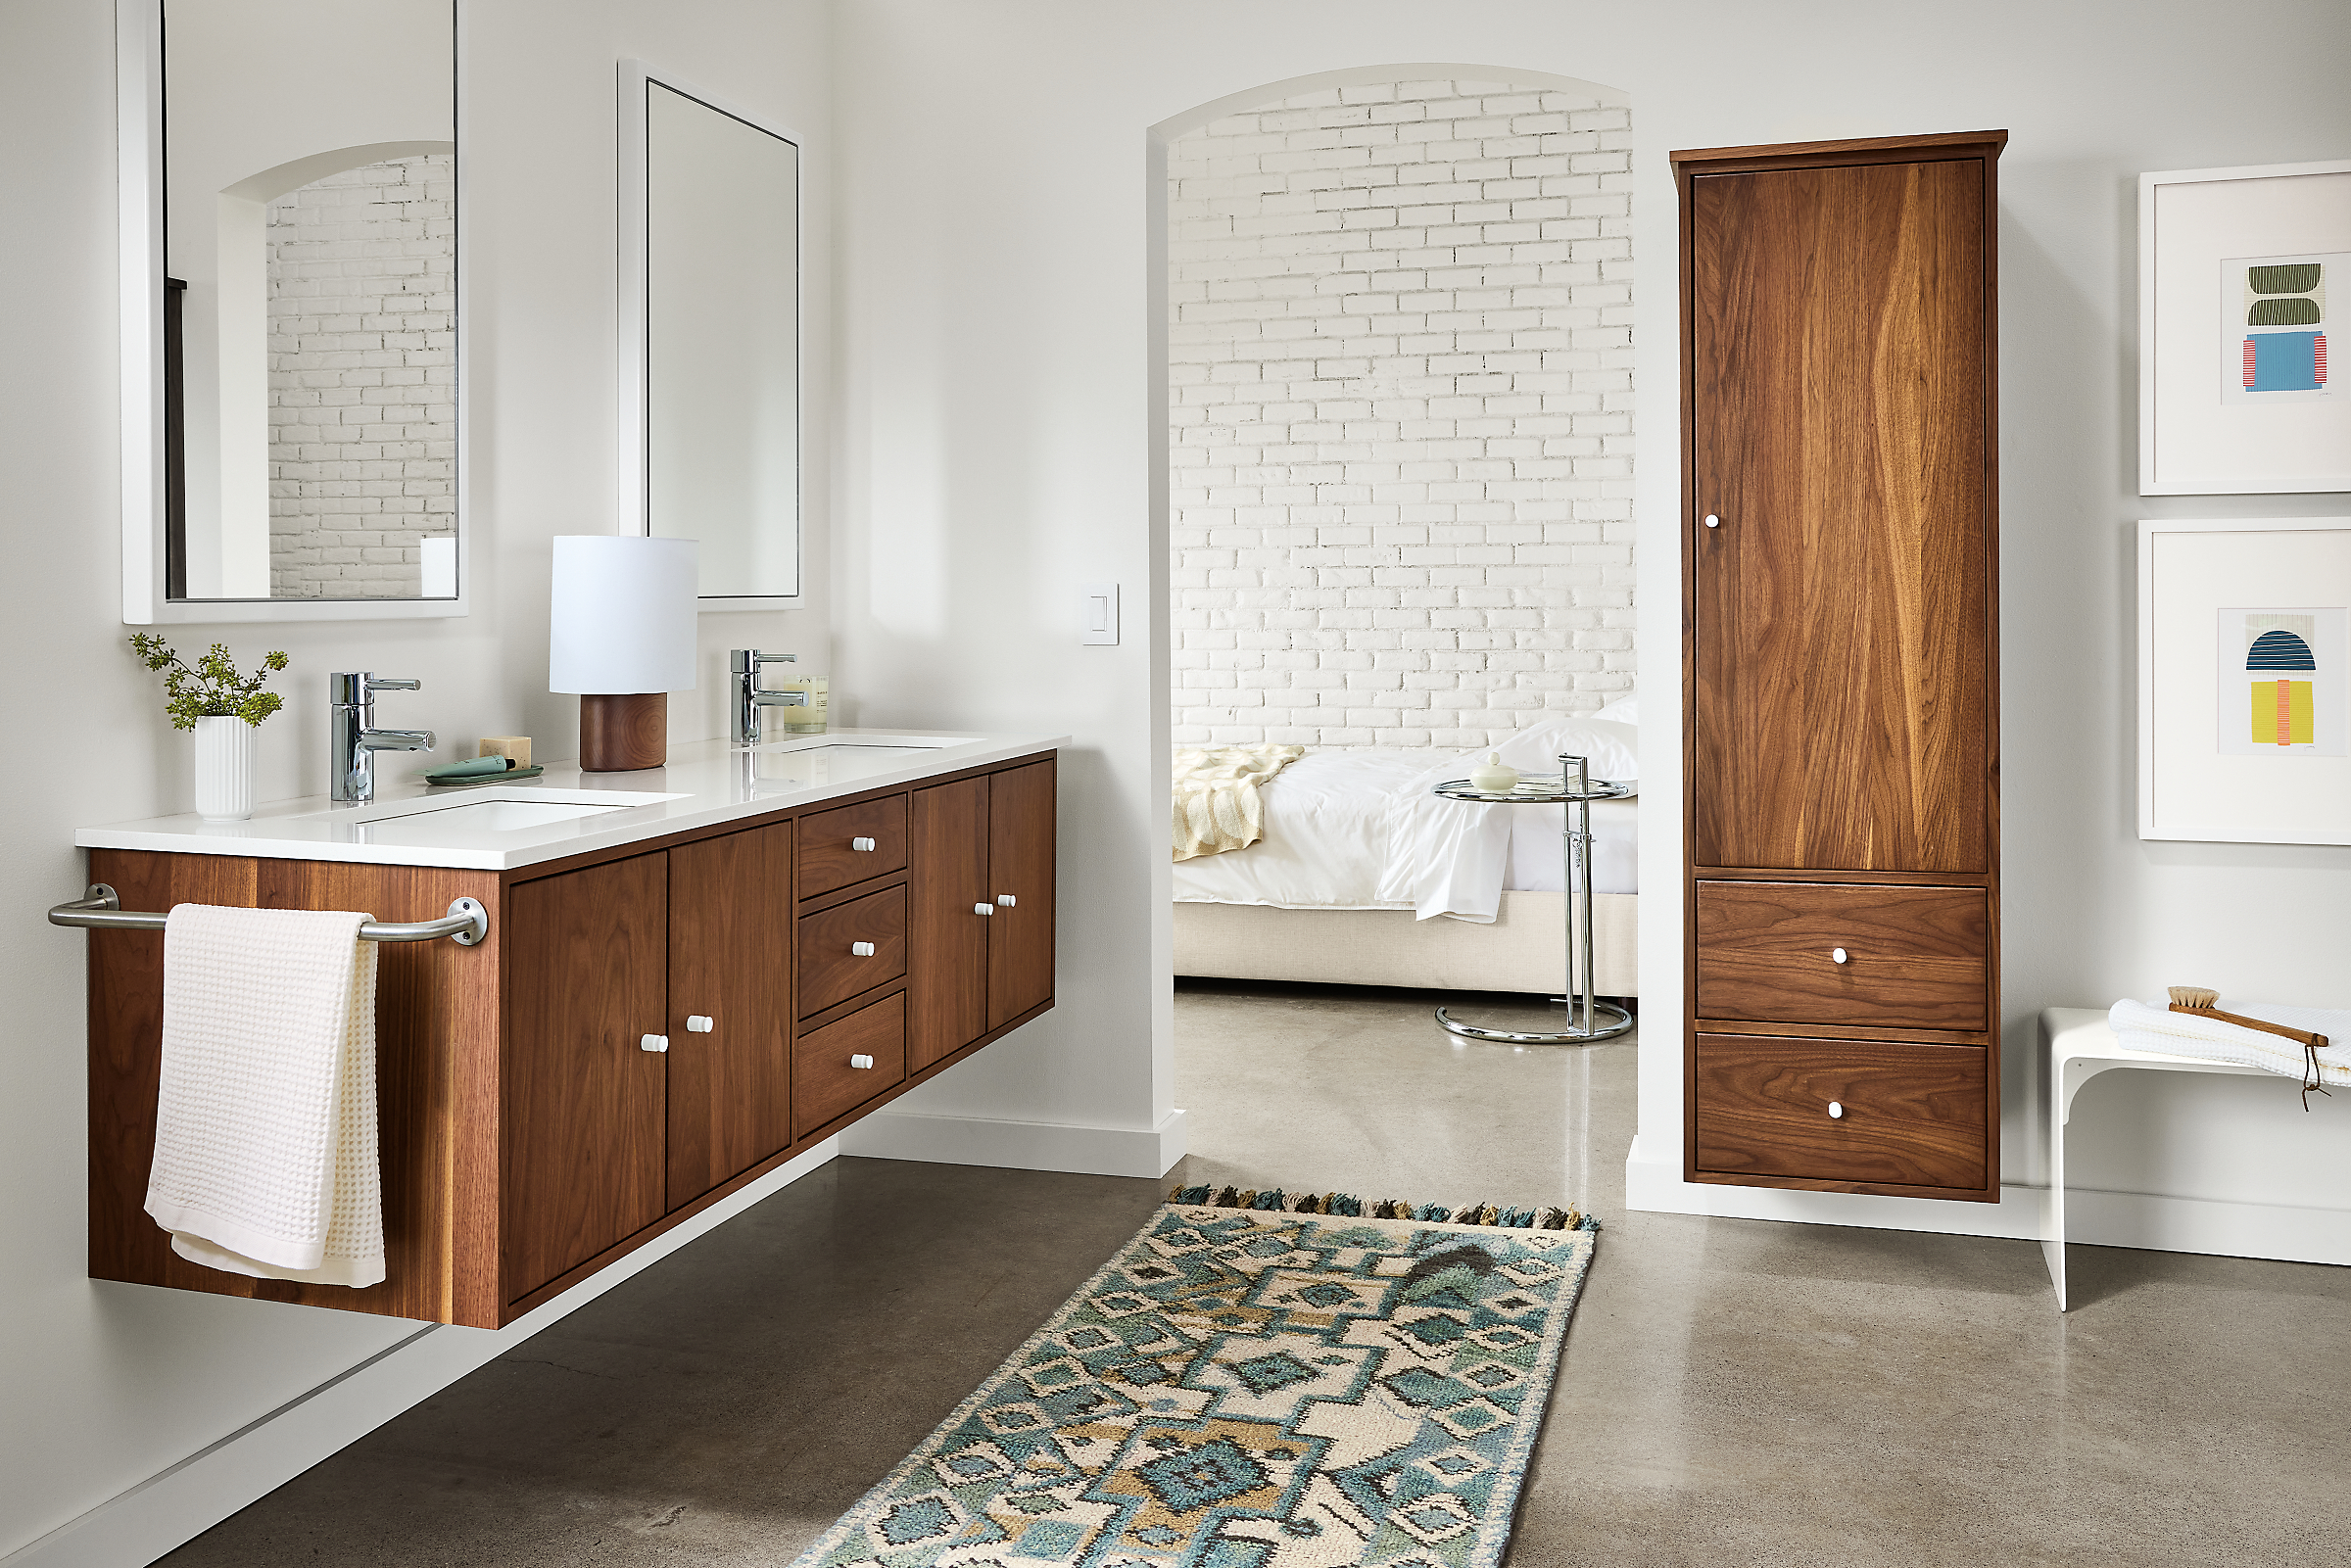 Bathroom with Linear floating vanity in walnut with double sink and Ona rug in ocean.